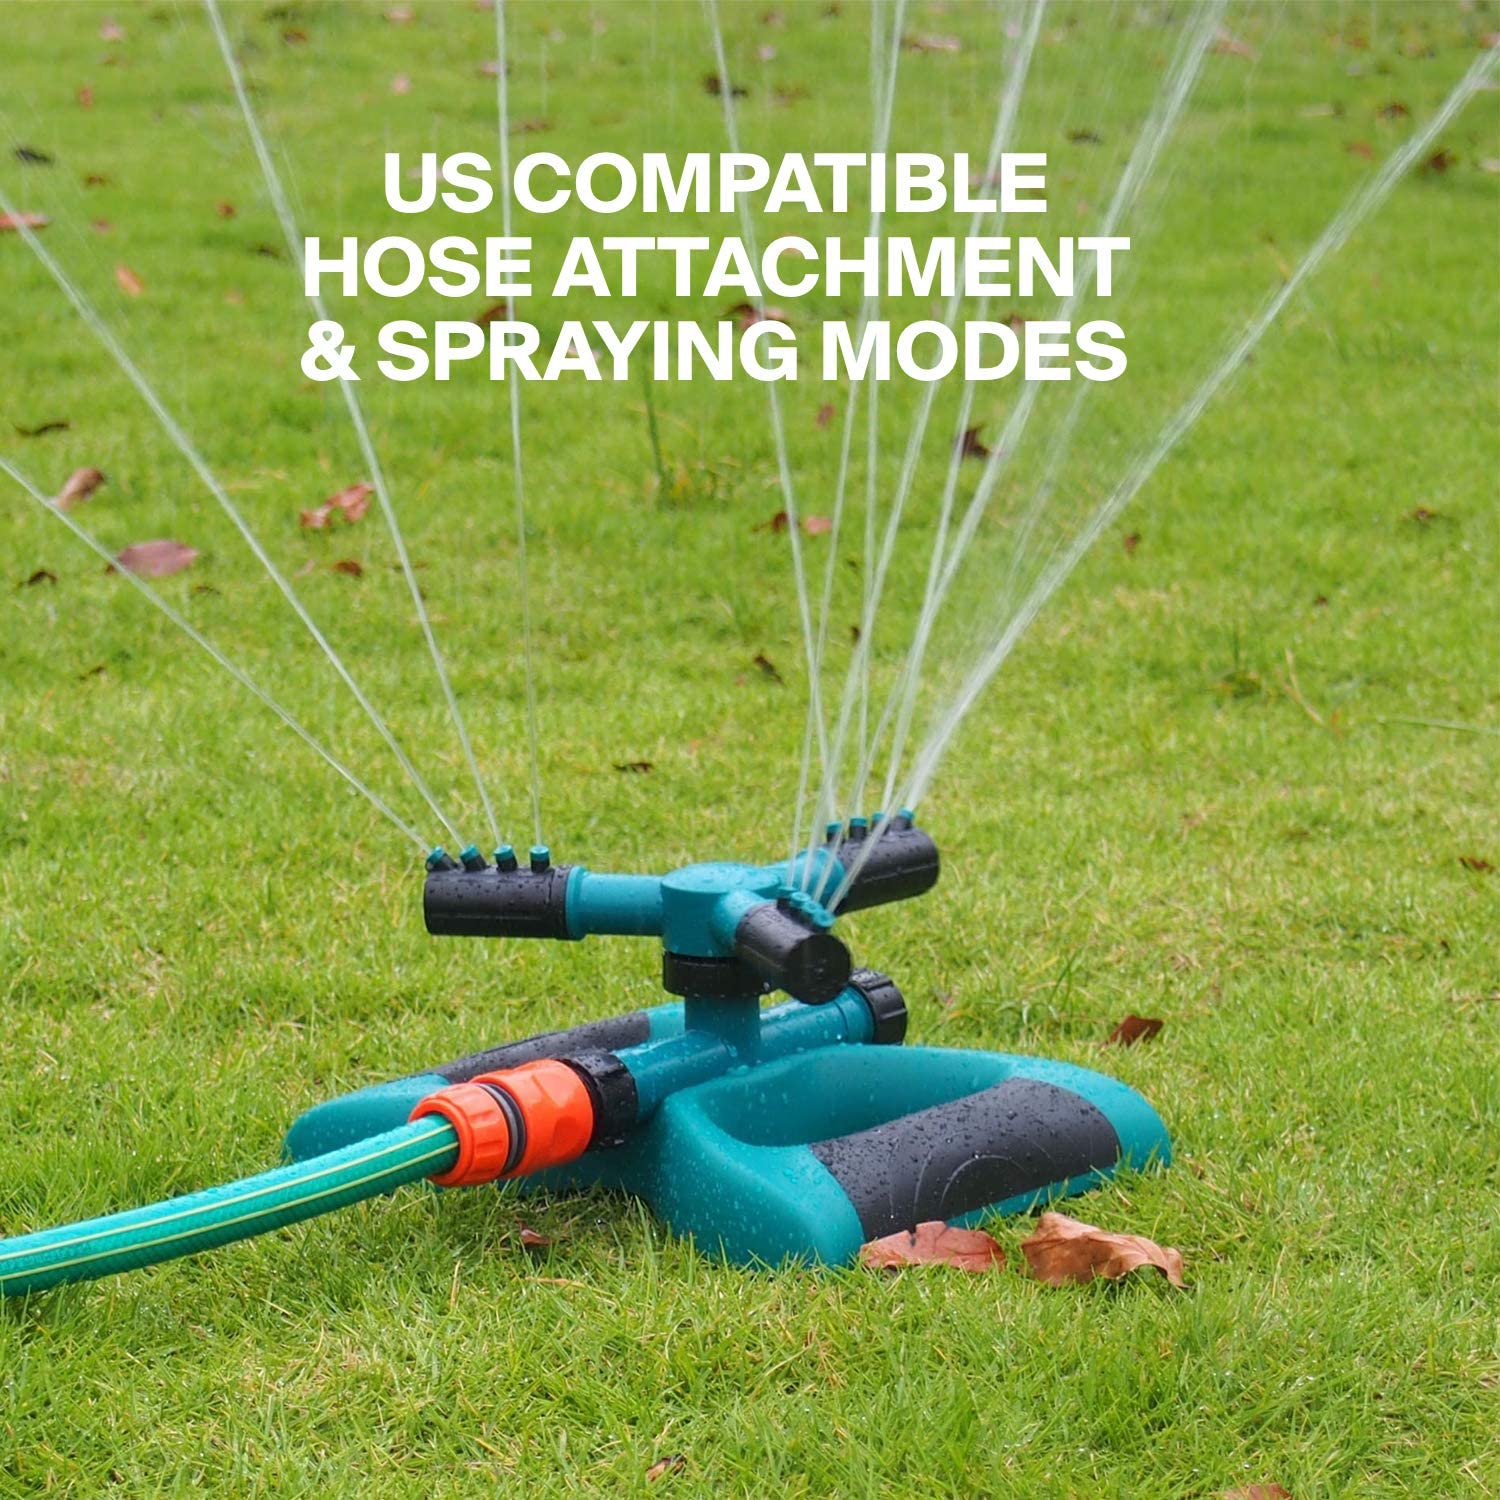 360 Degree Rotation Garden Sprinkler Green Automatic Spraying Large Area Coverage Suitable for Planting Irrigation and Children's Play 